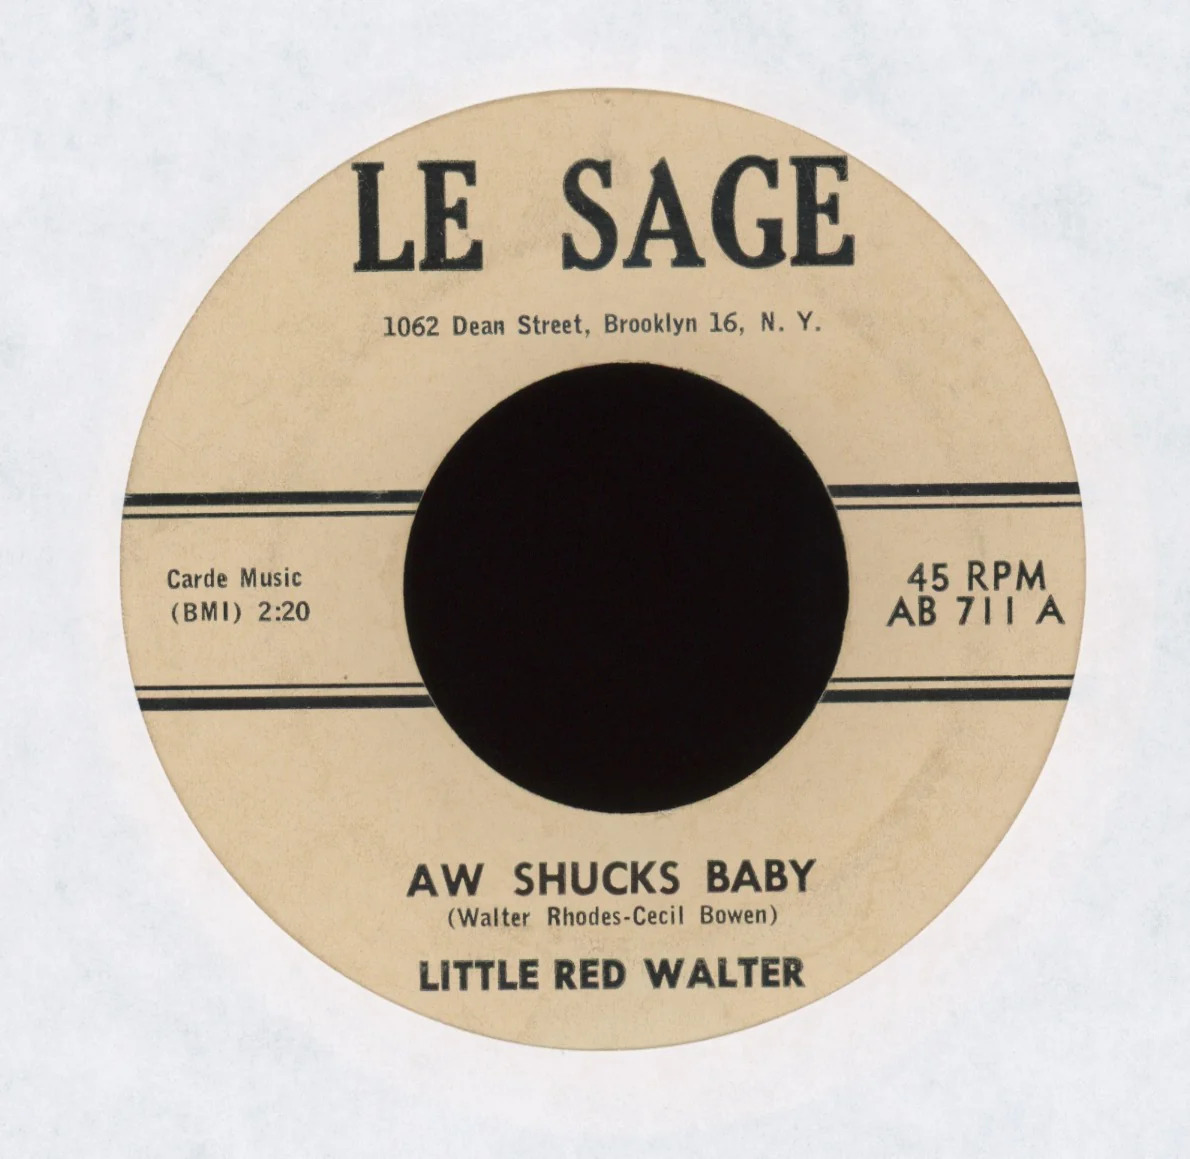 Blues 45 - Little Red Walter - Aw Shucks Baby on Le Sage